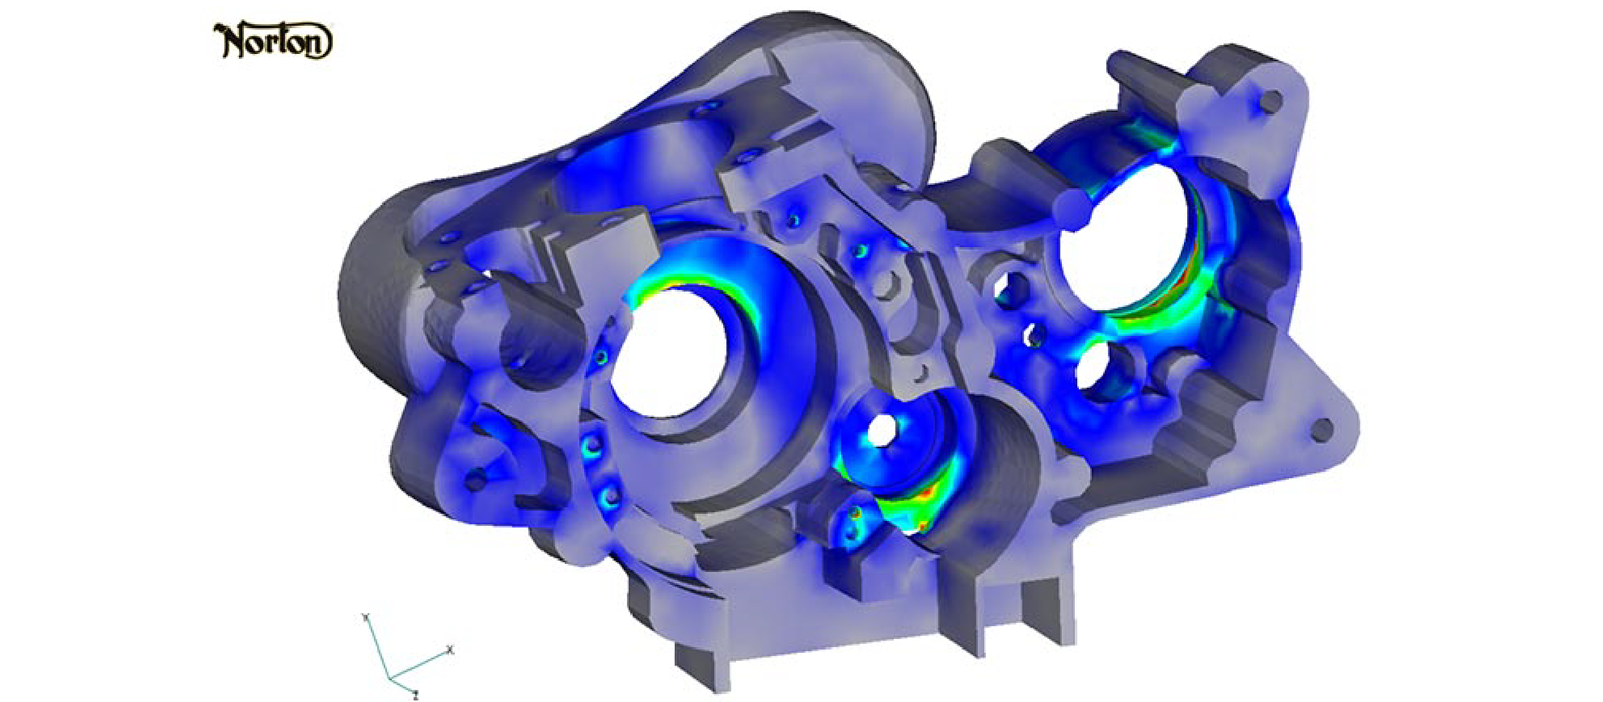 FEA model of Norton crankcase for oil sealing efficiency (no leaks) - Finite Element Analysis Engine Oil Seals